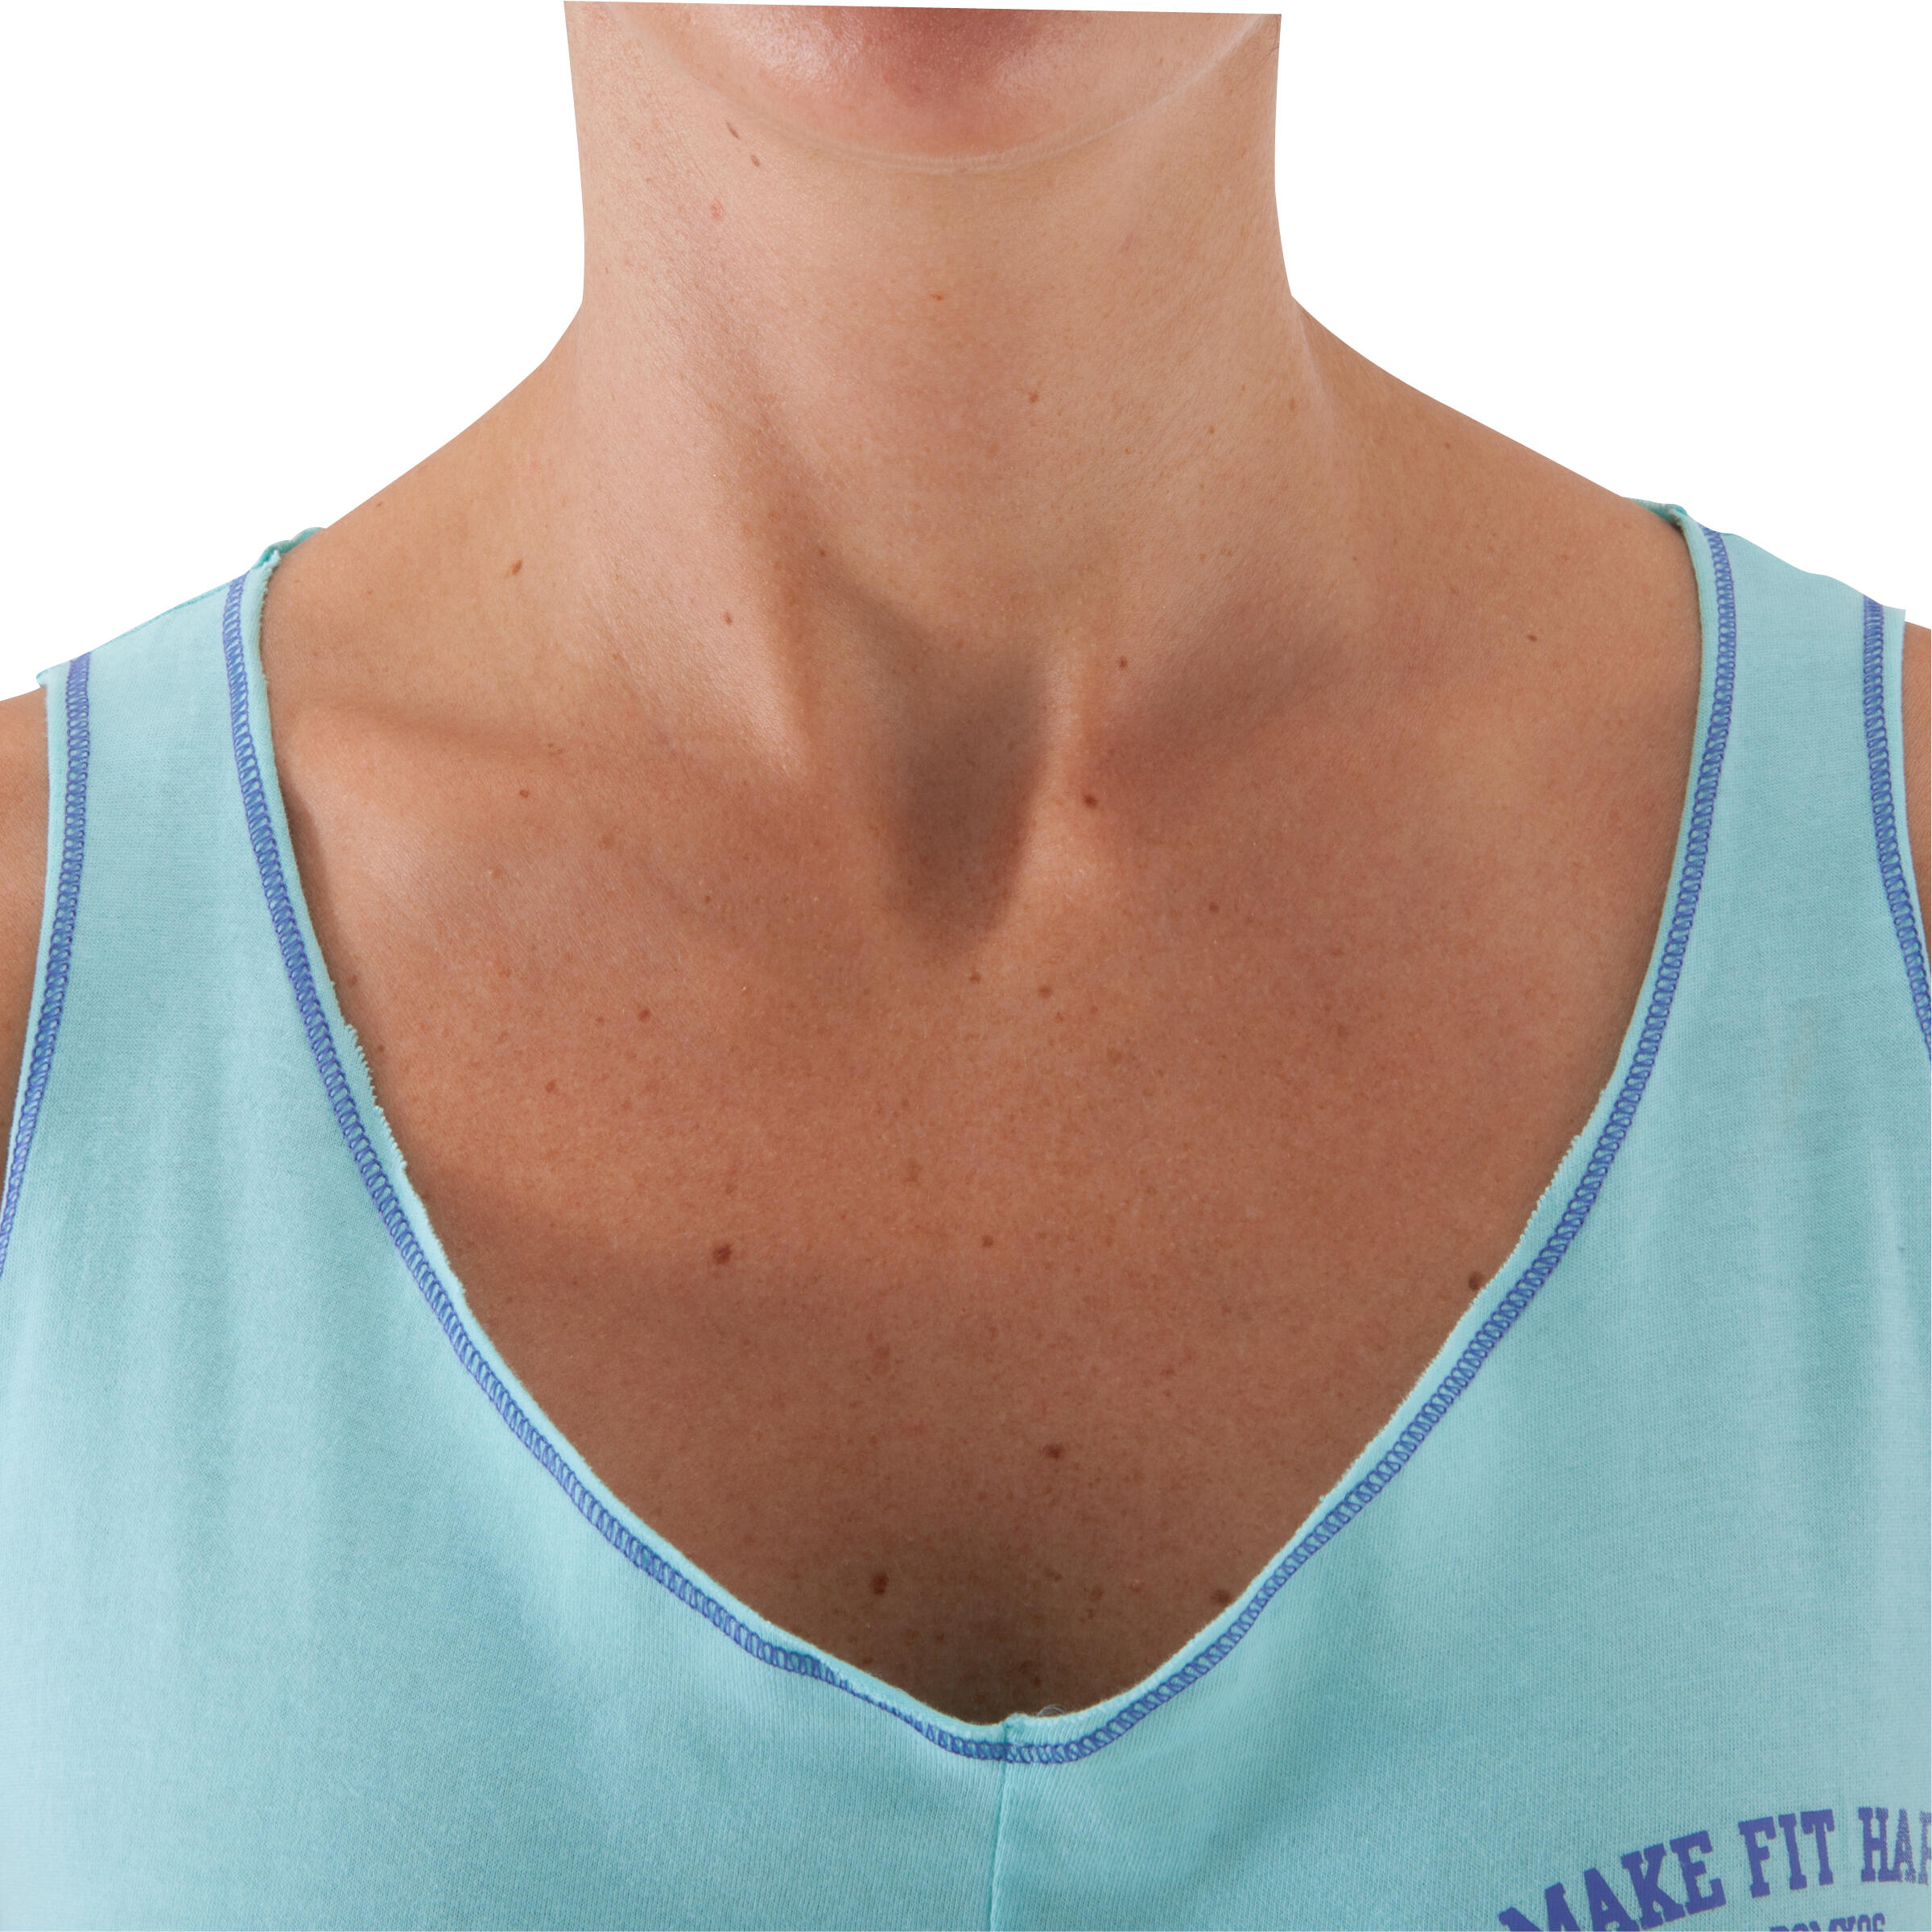 Women's Fitness Tank Top - Turquoise 7/12